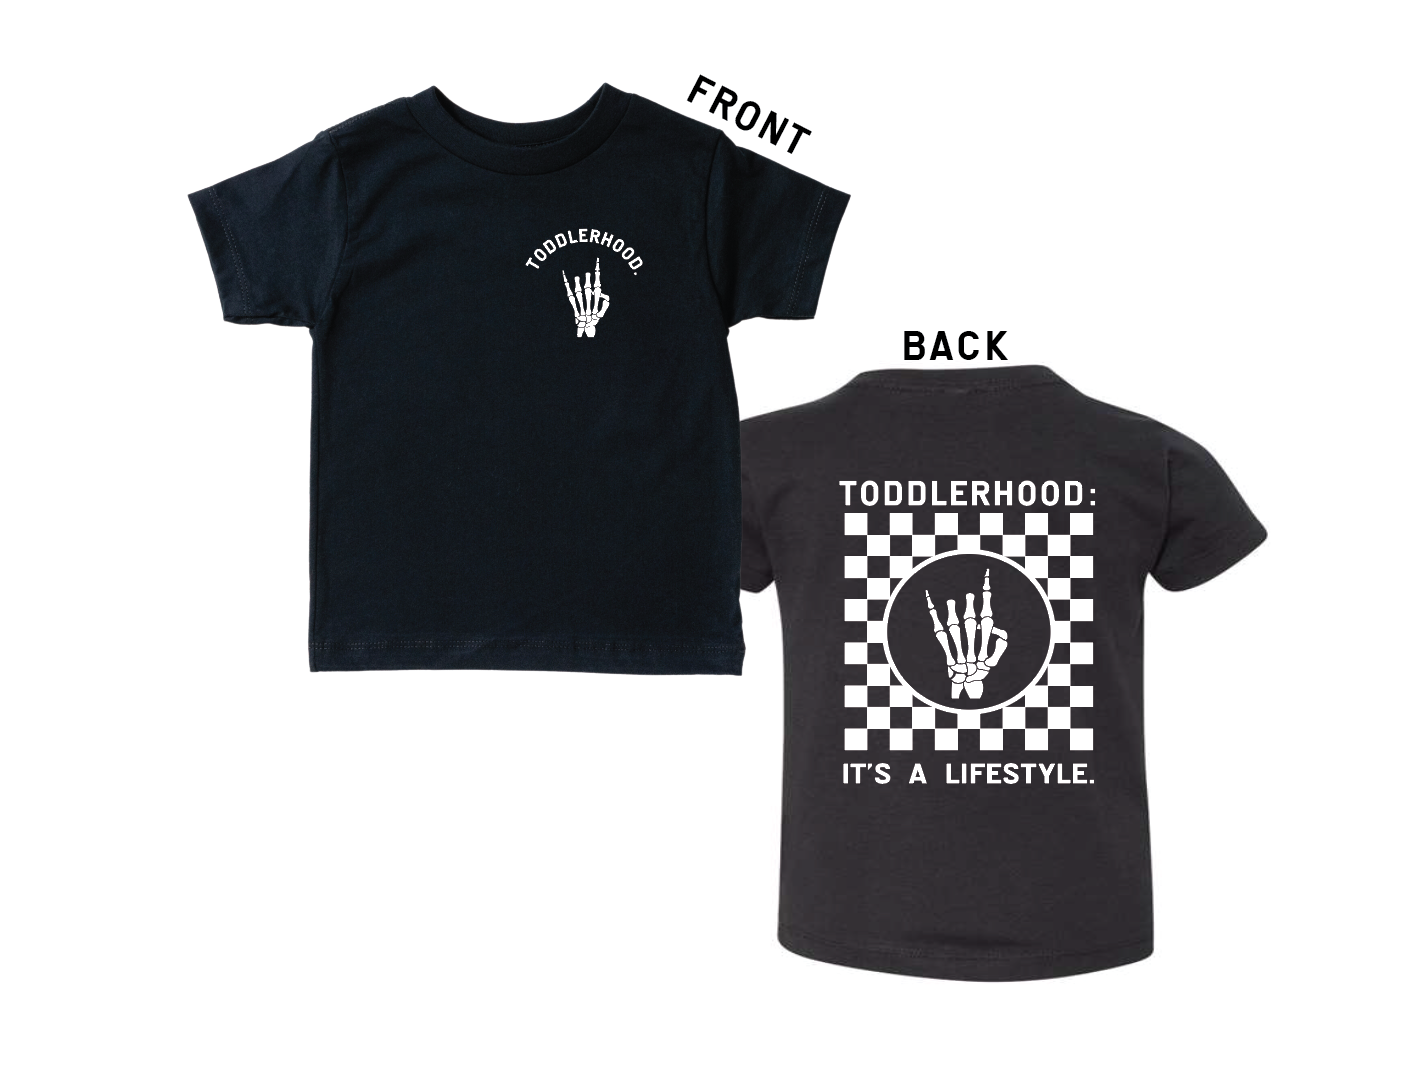 Toddlerhood - "It's a Lifestyle" Kids Tee - Front + Back: Black / 3T